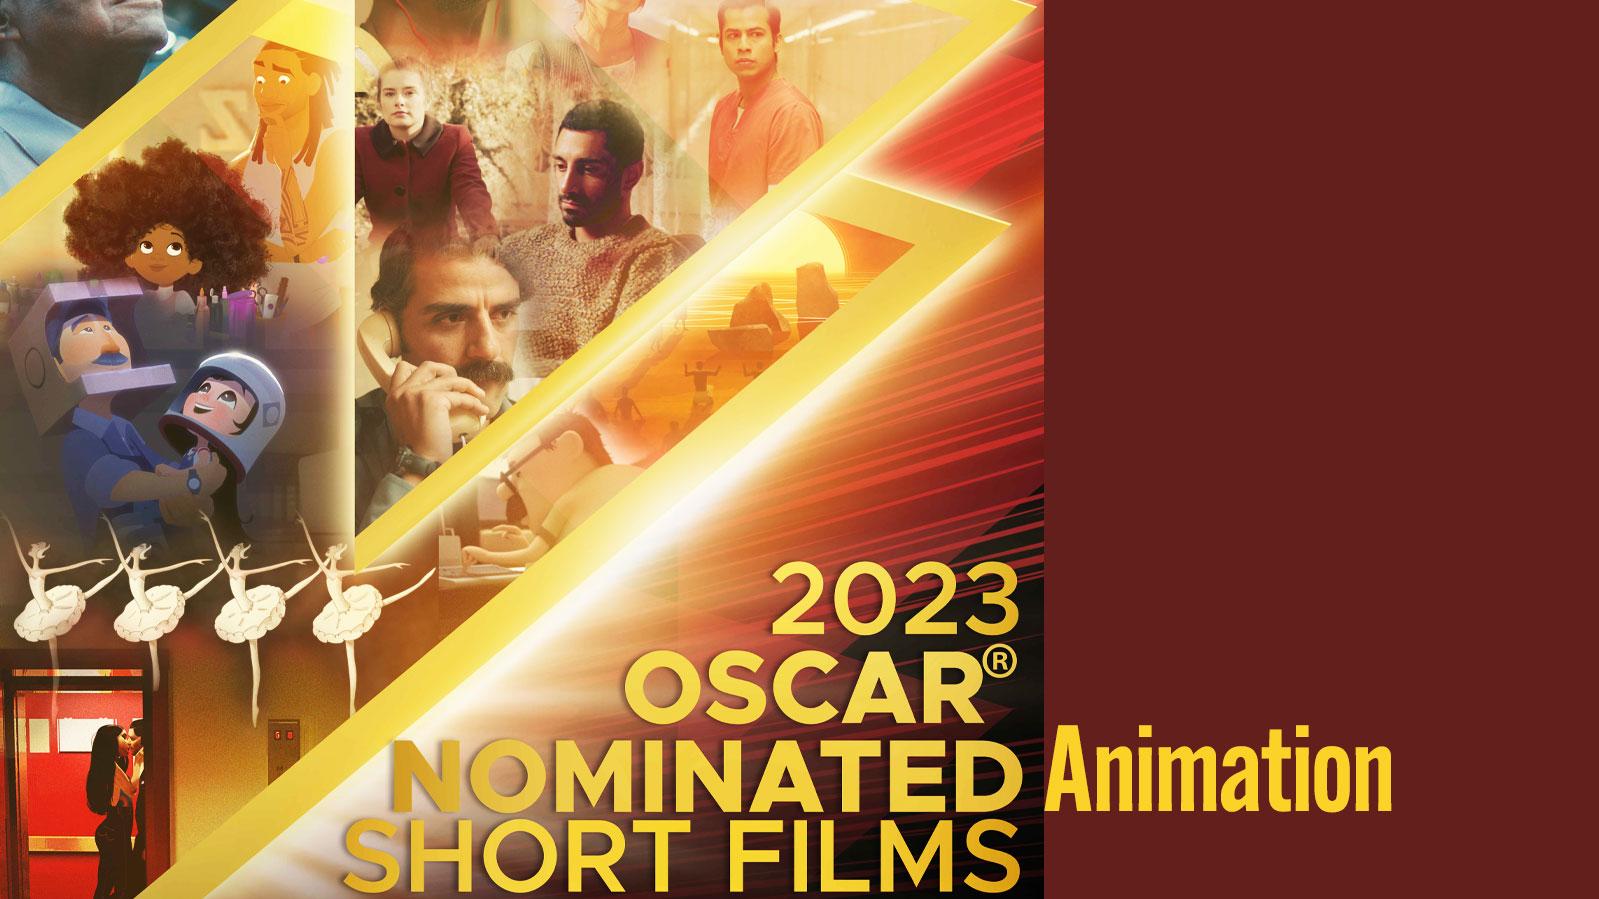 Poster with text "2023 Oscar Nominated Shorts Animation"